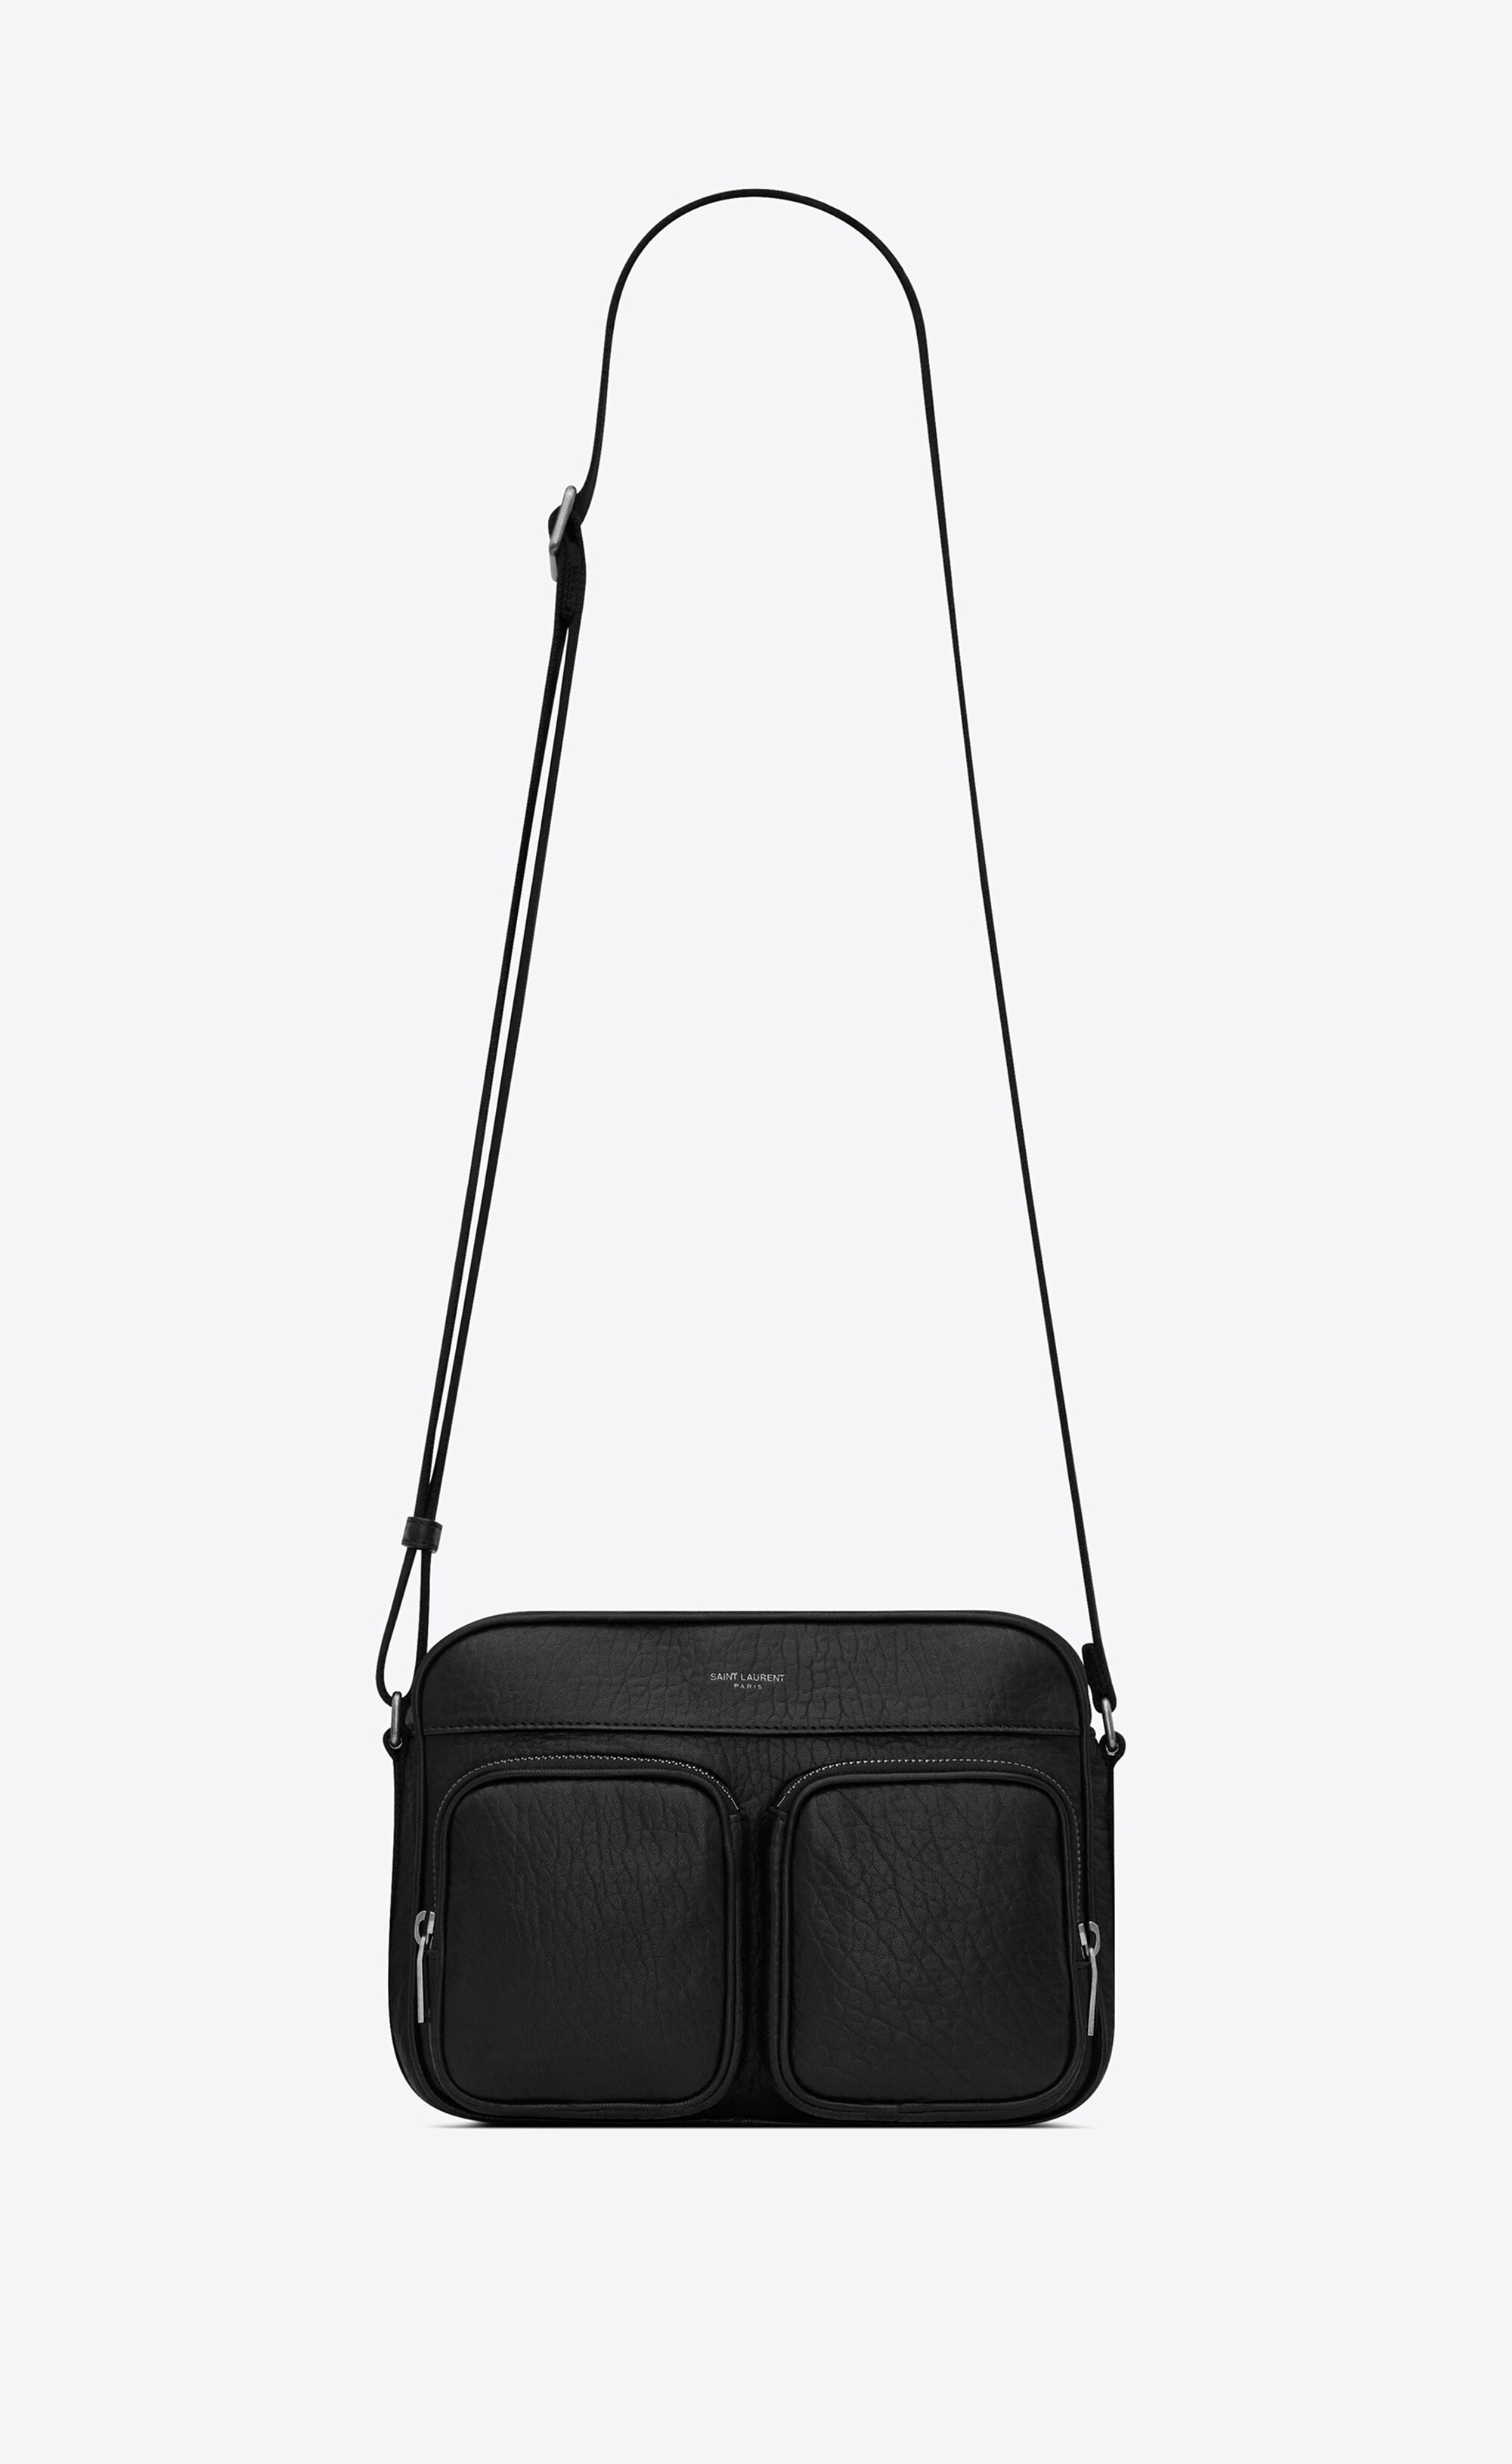 city saint laurent camera bag in grained leather - 1